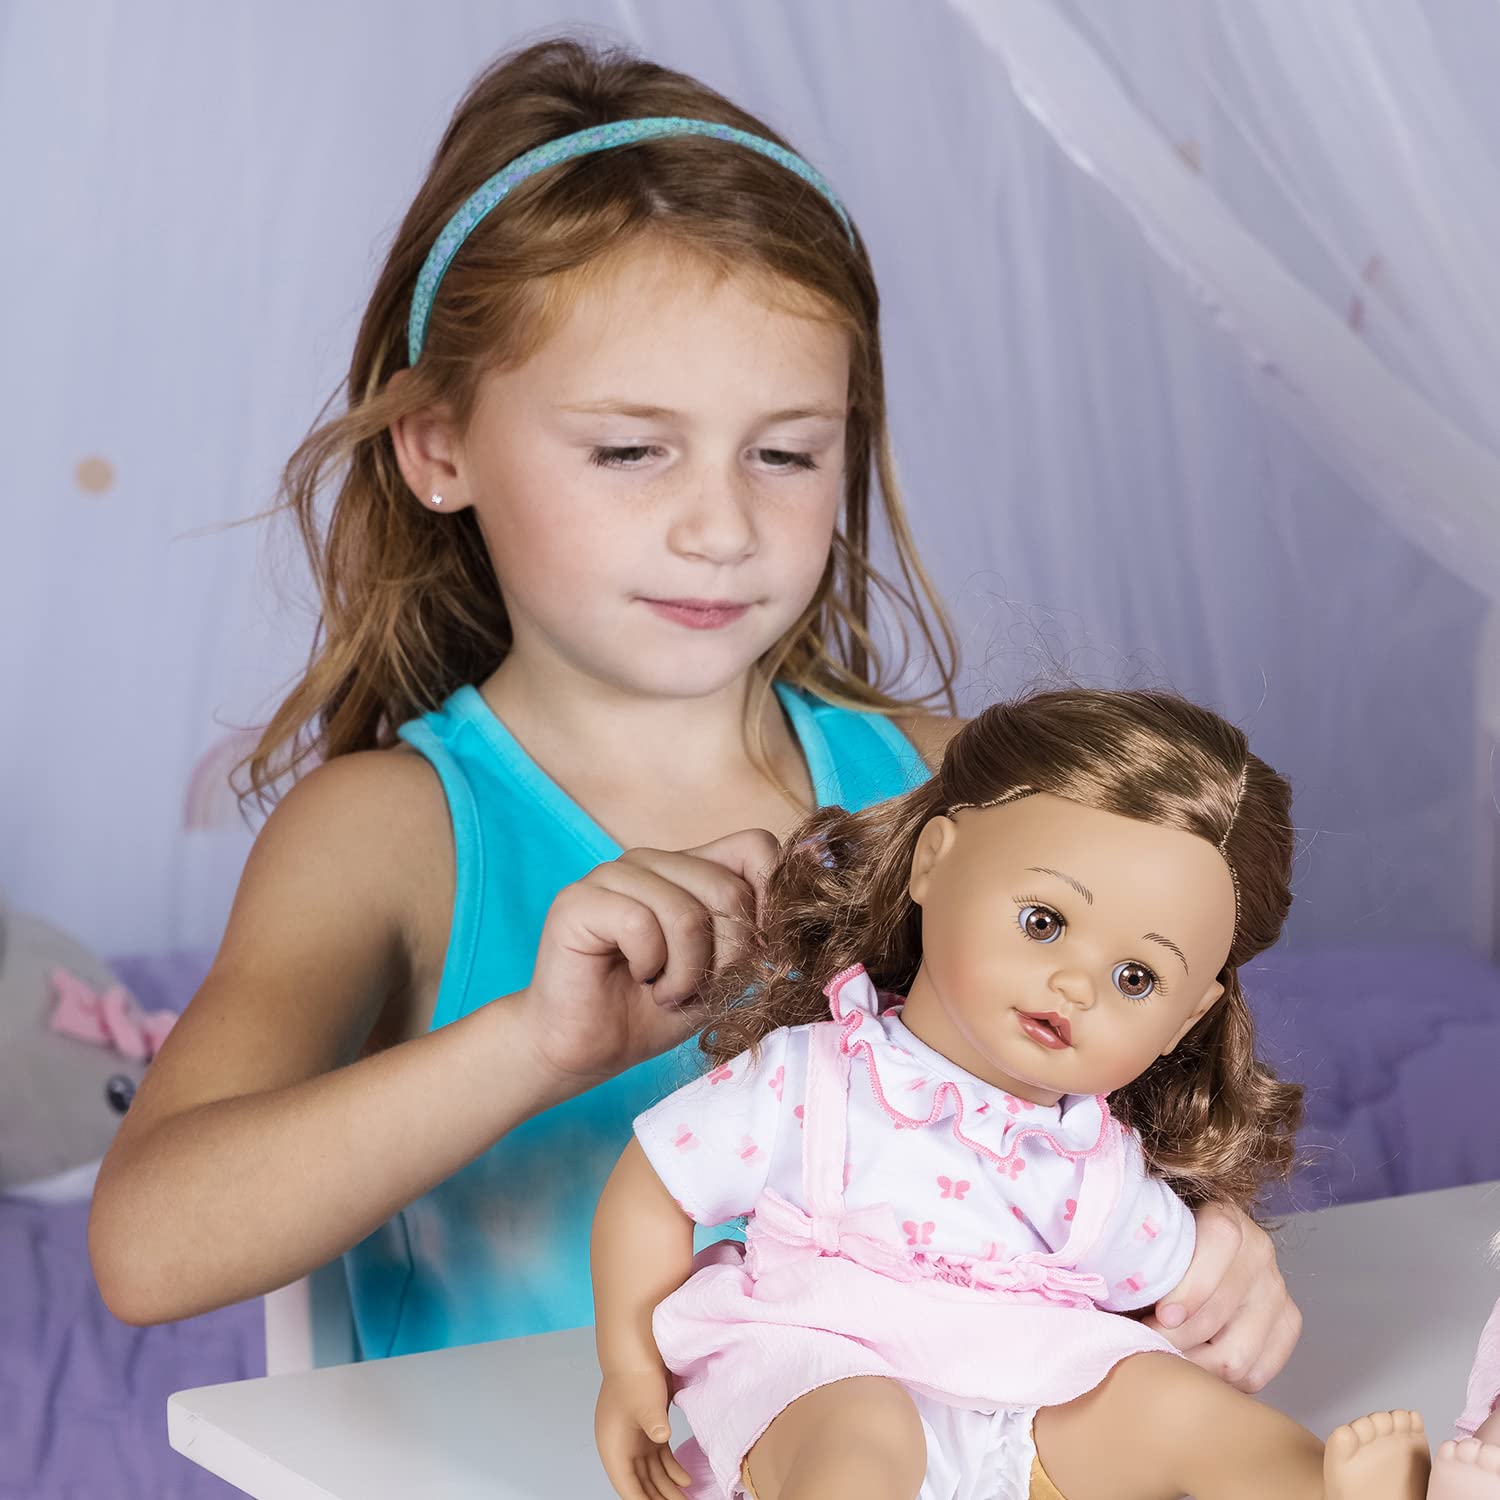 Adora My Sweet Hair Style Doll Sofia, 15 inch Toddler Doll with Silky Soft Long Brown Hair, Open/Close Brown Eyes & Medium Skin Tone